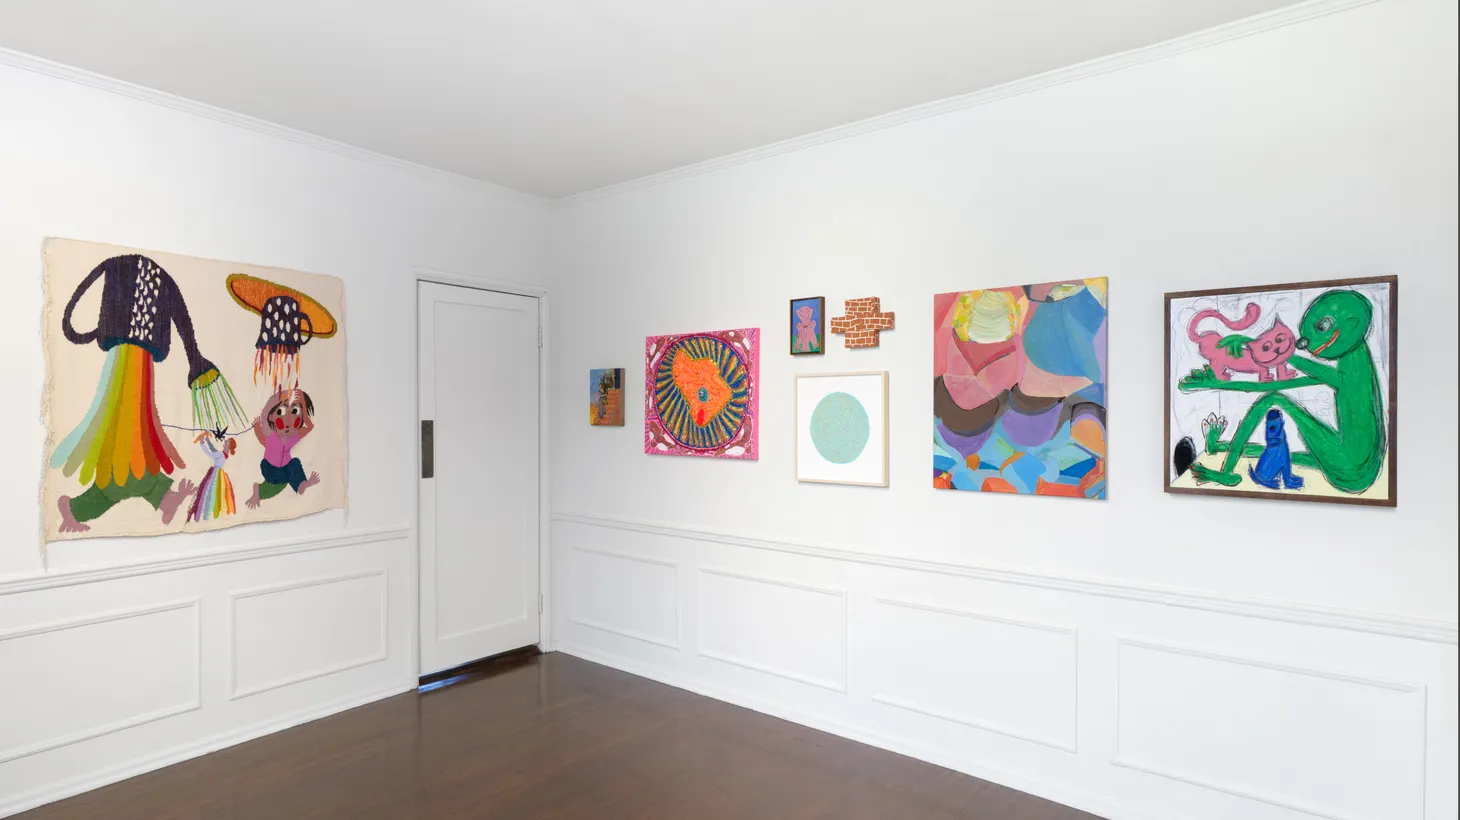 Parker Gallery’s “Wishing Well” is full of bright and colorful works from over 60 artists representing “the zeitgeist of the moment,” says Lindsay Preston Zappas.